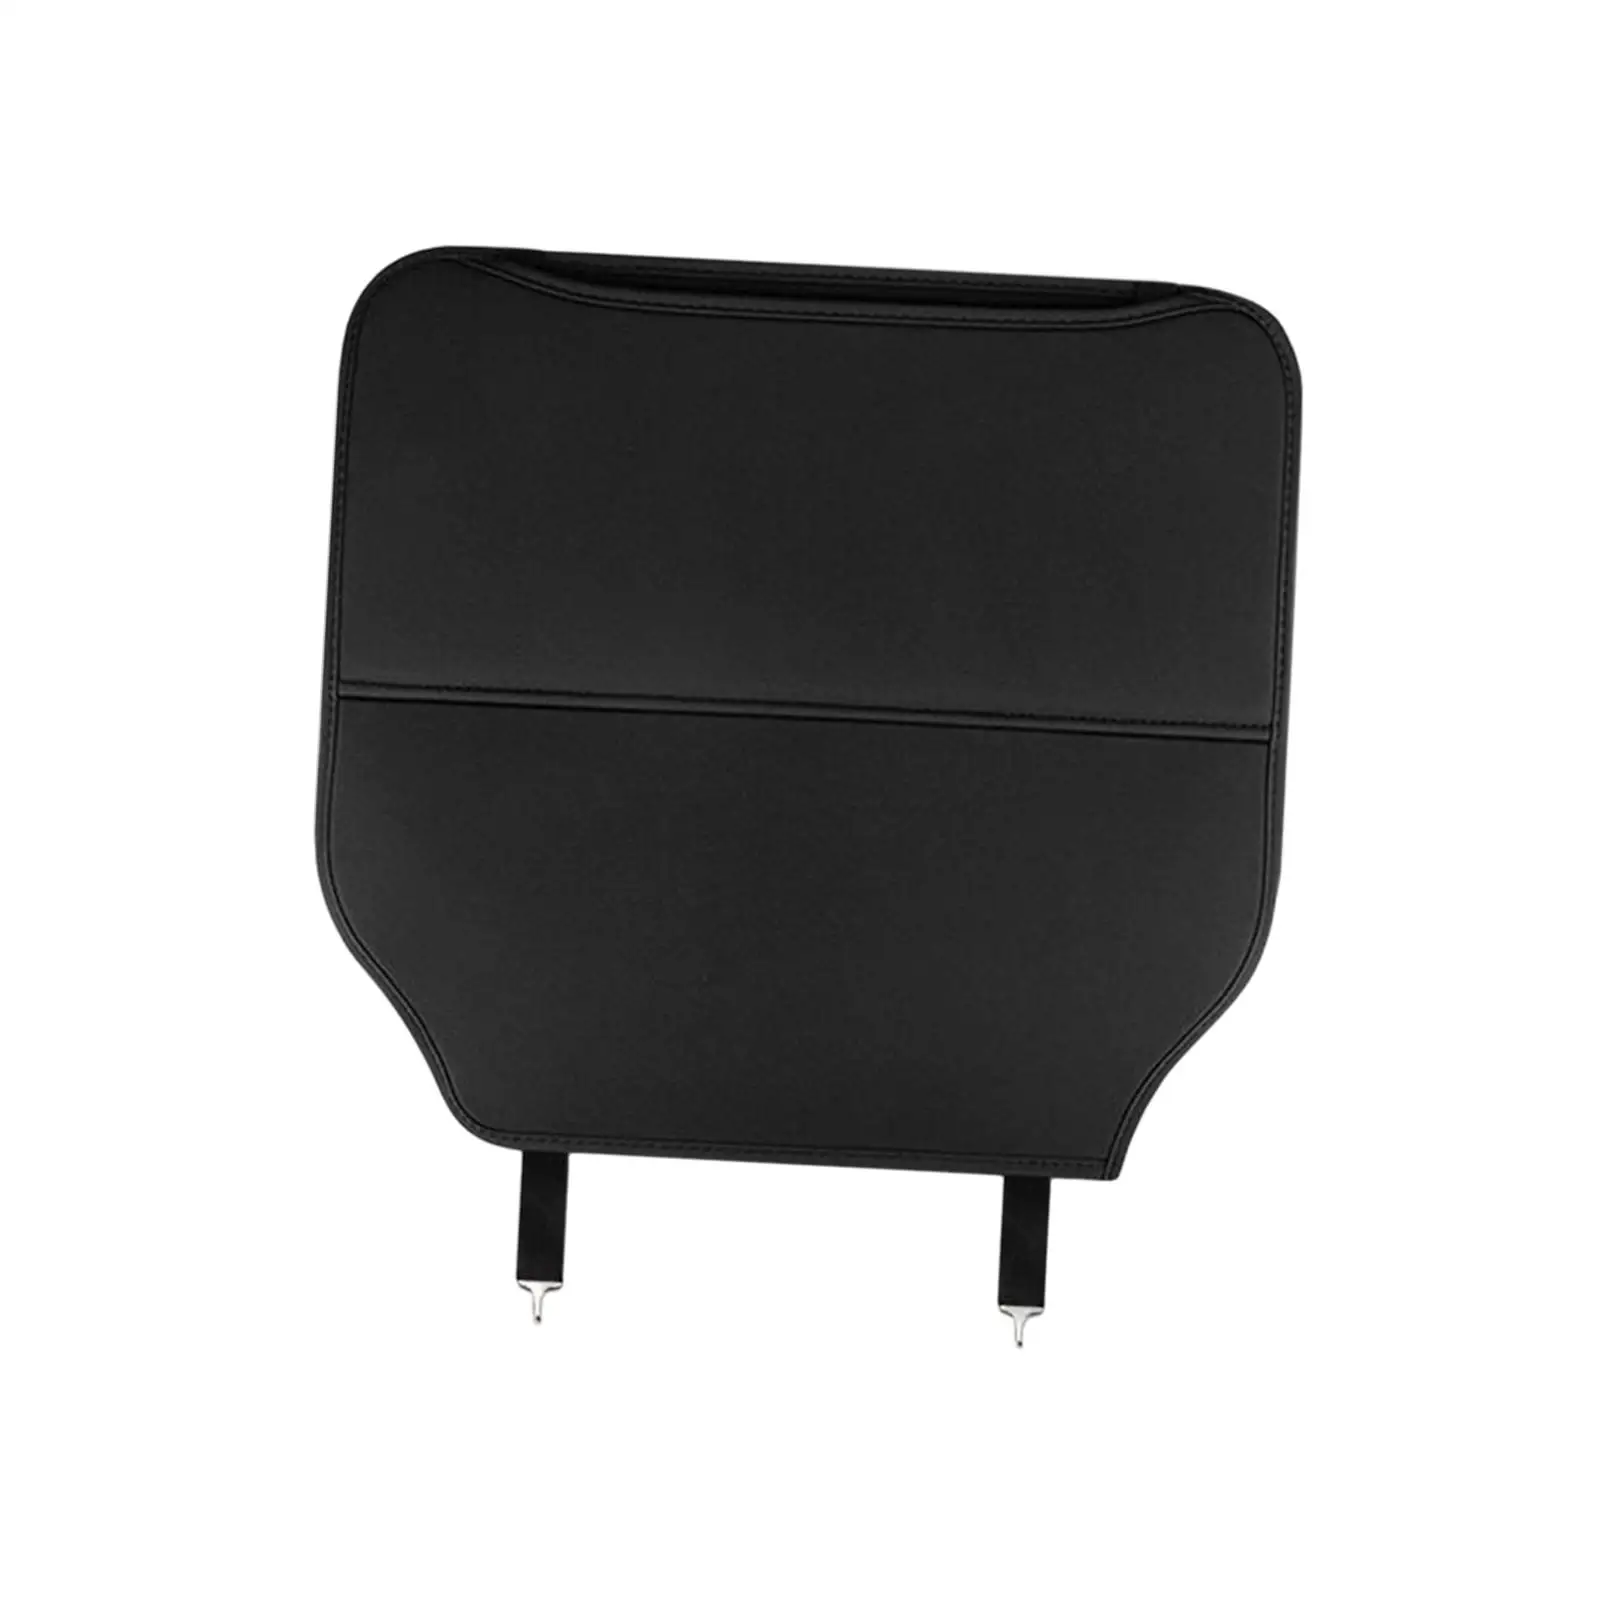 Vehicle Seat Back Kick Pad Backseat Protector Cover Waterproof for Byd Atto 3 Yuan pro Interior Decoration